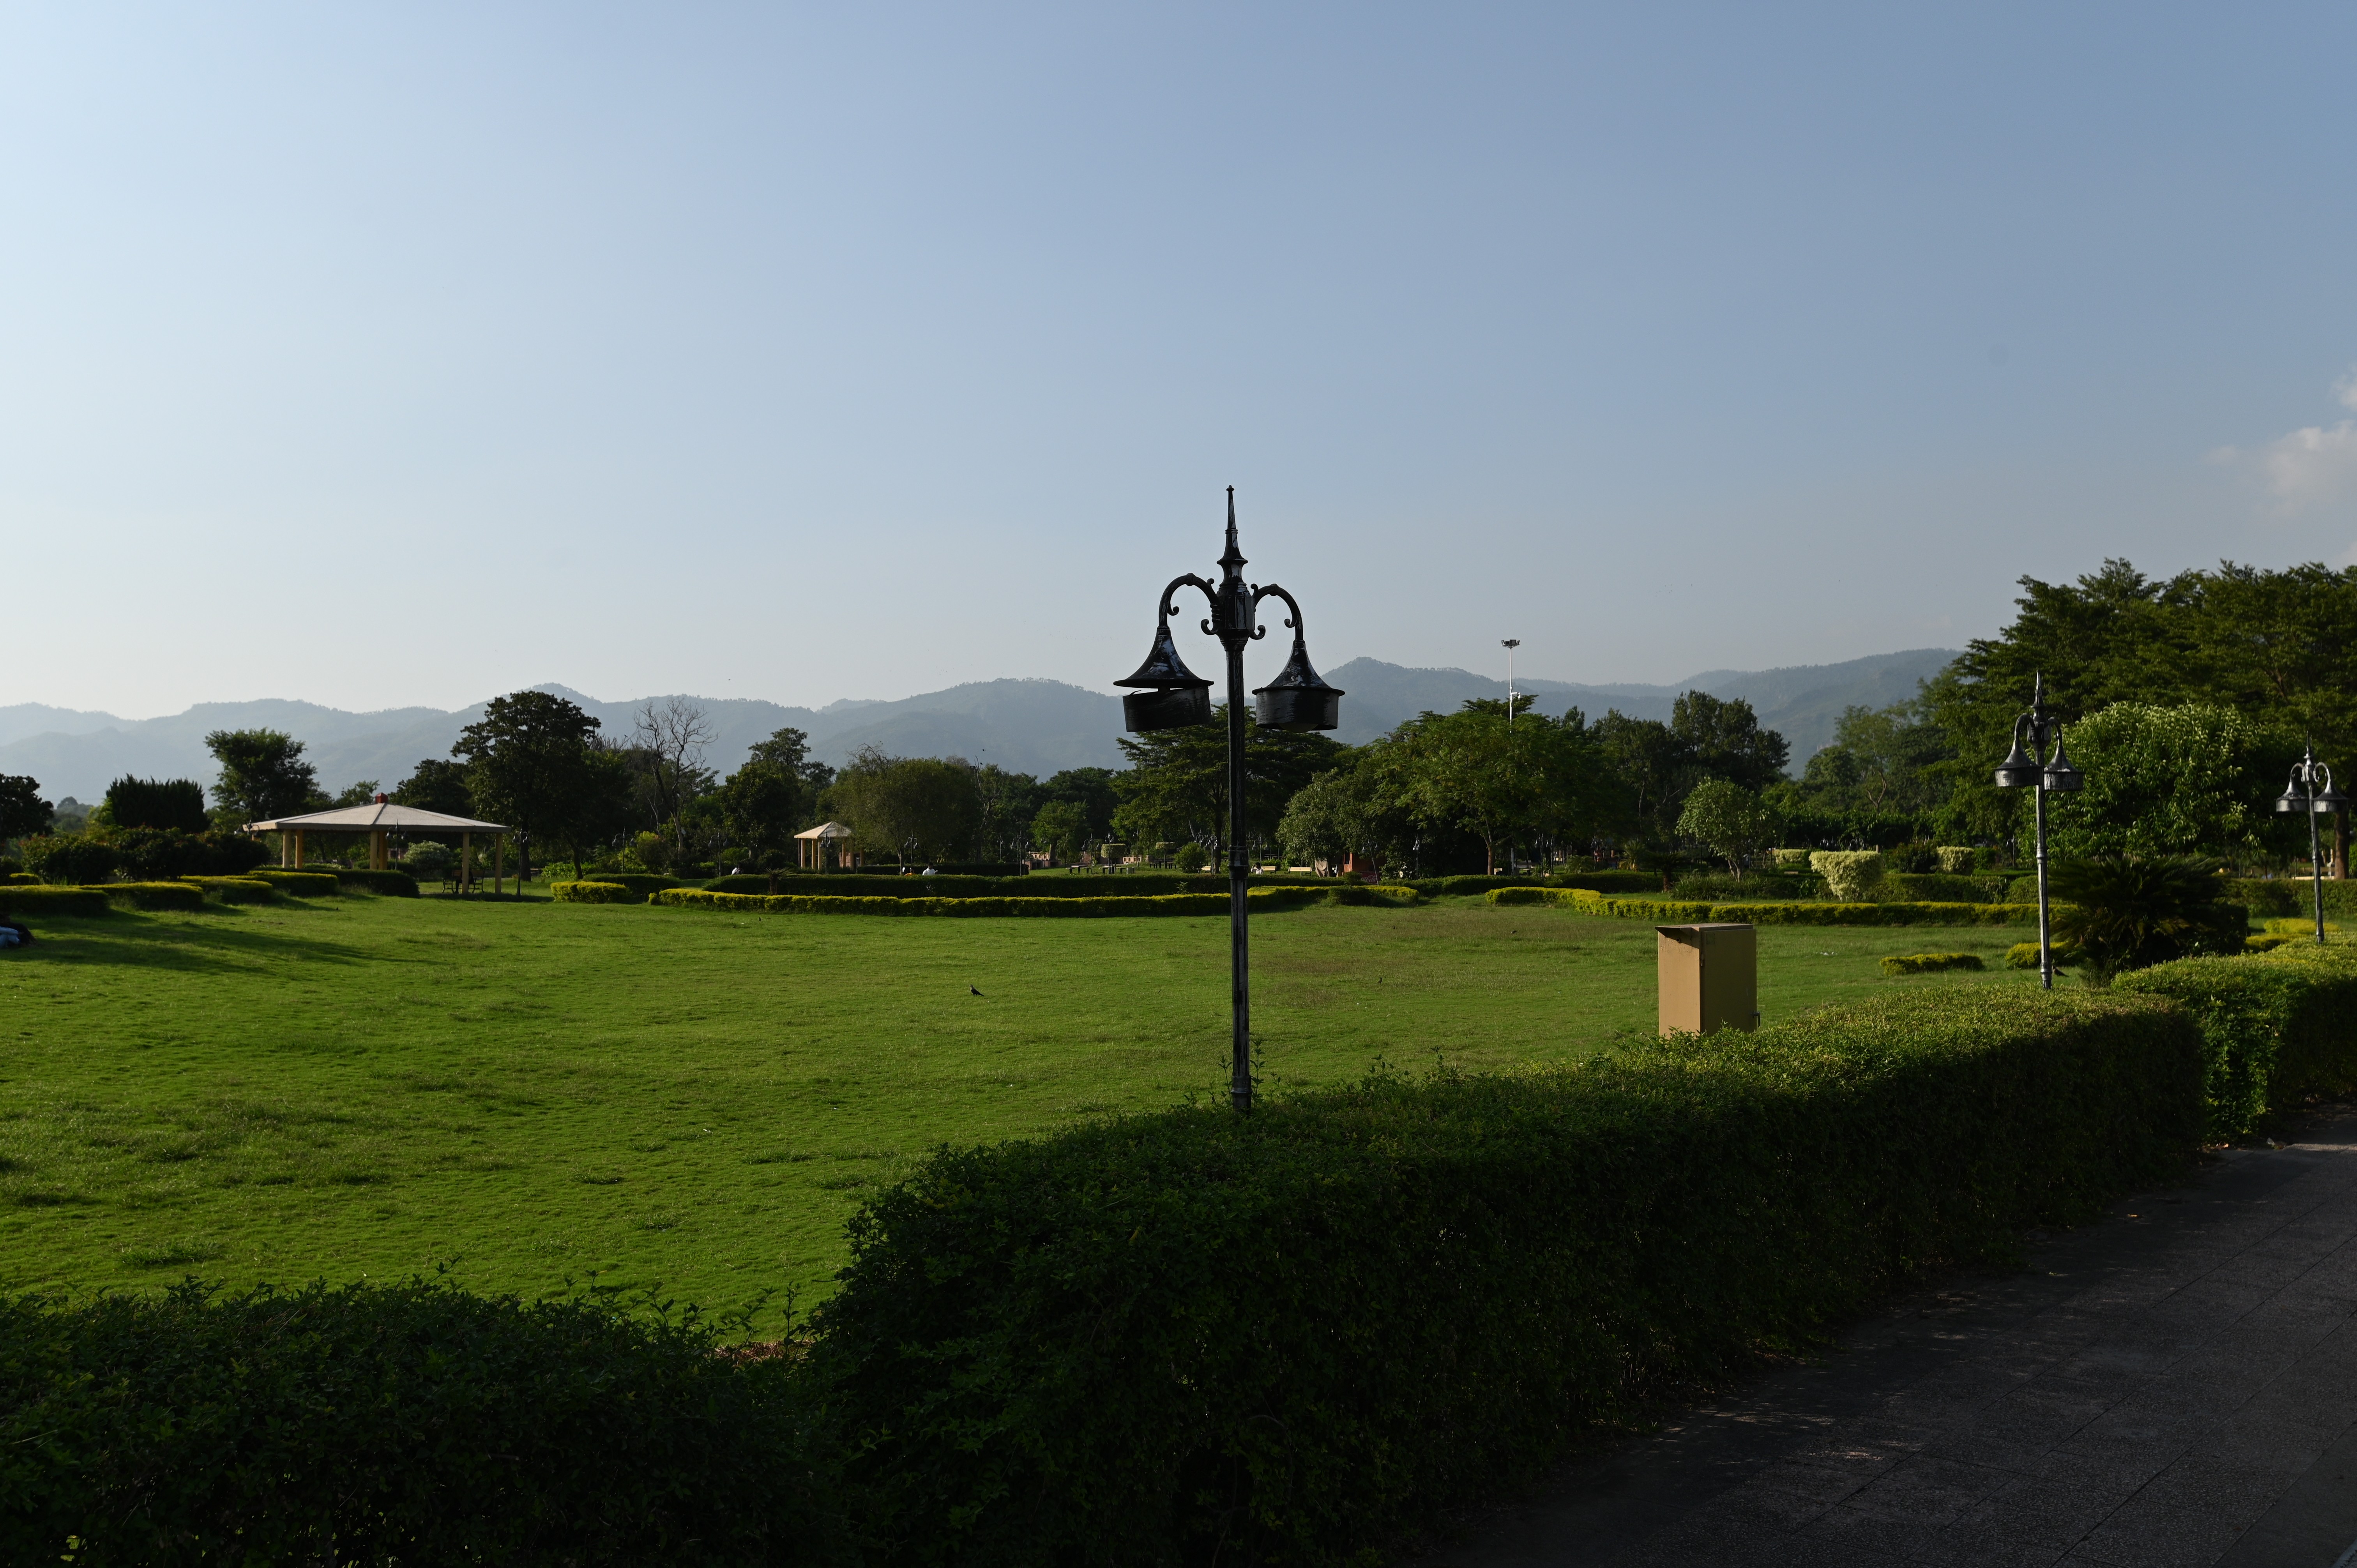 the scenic beauty of margalla hills from lake view park